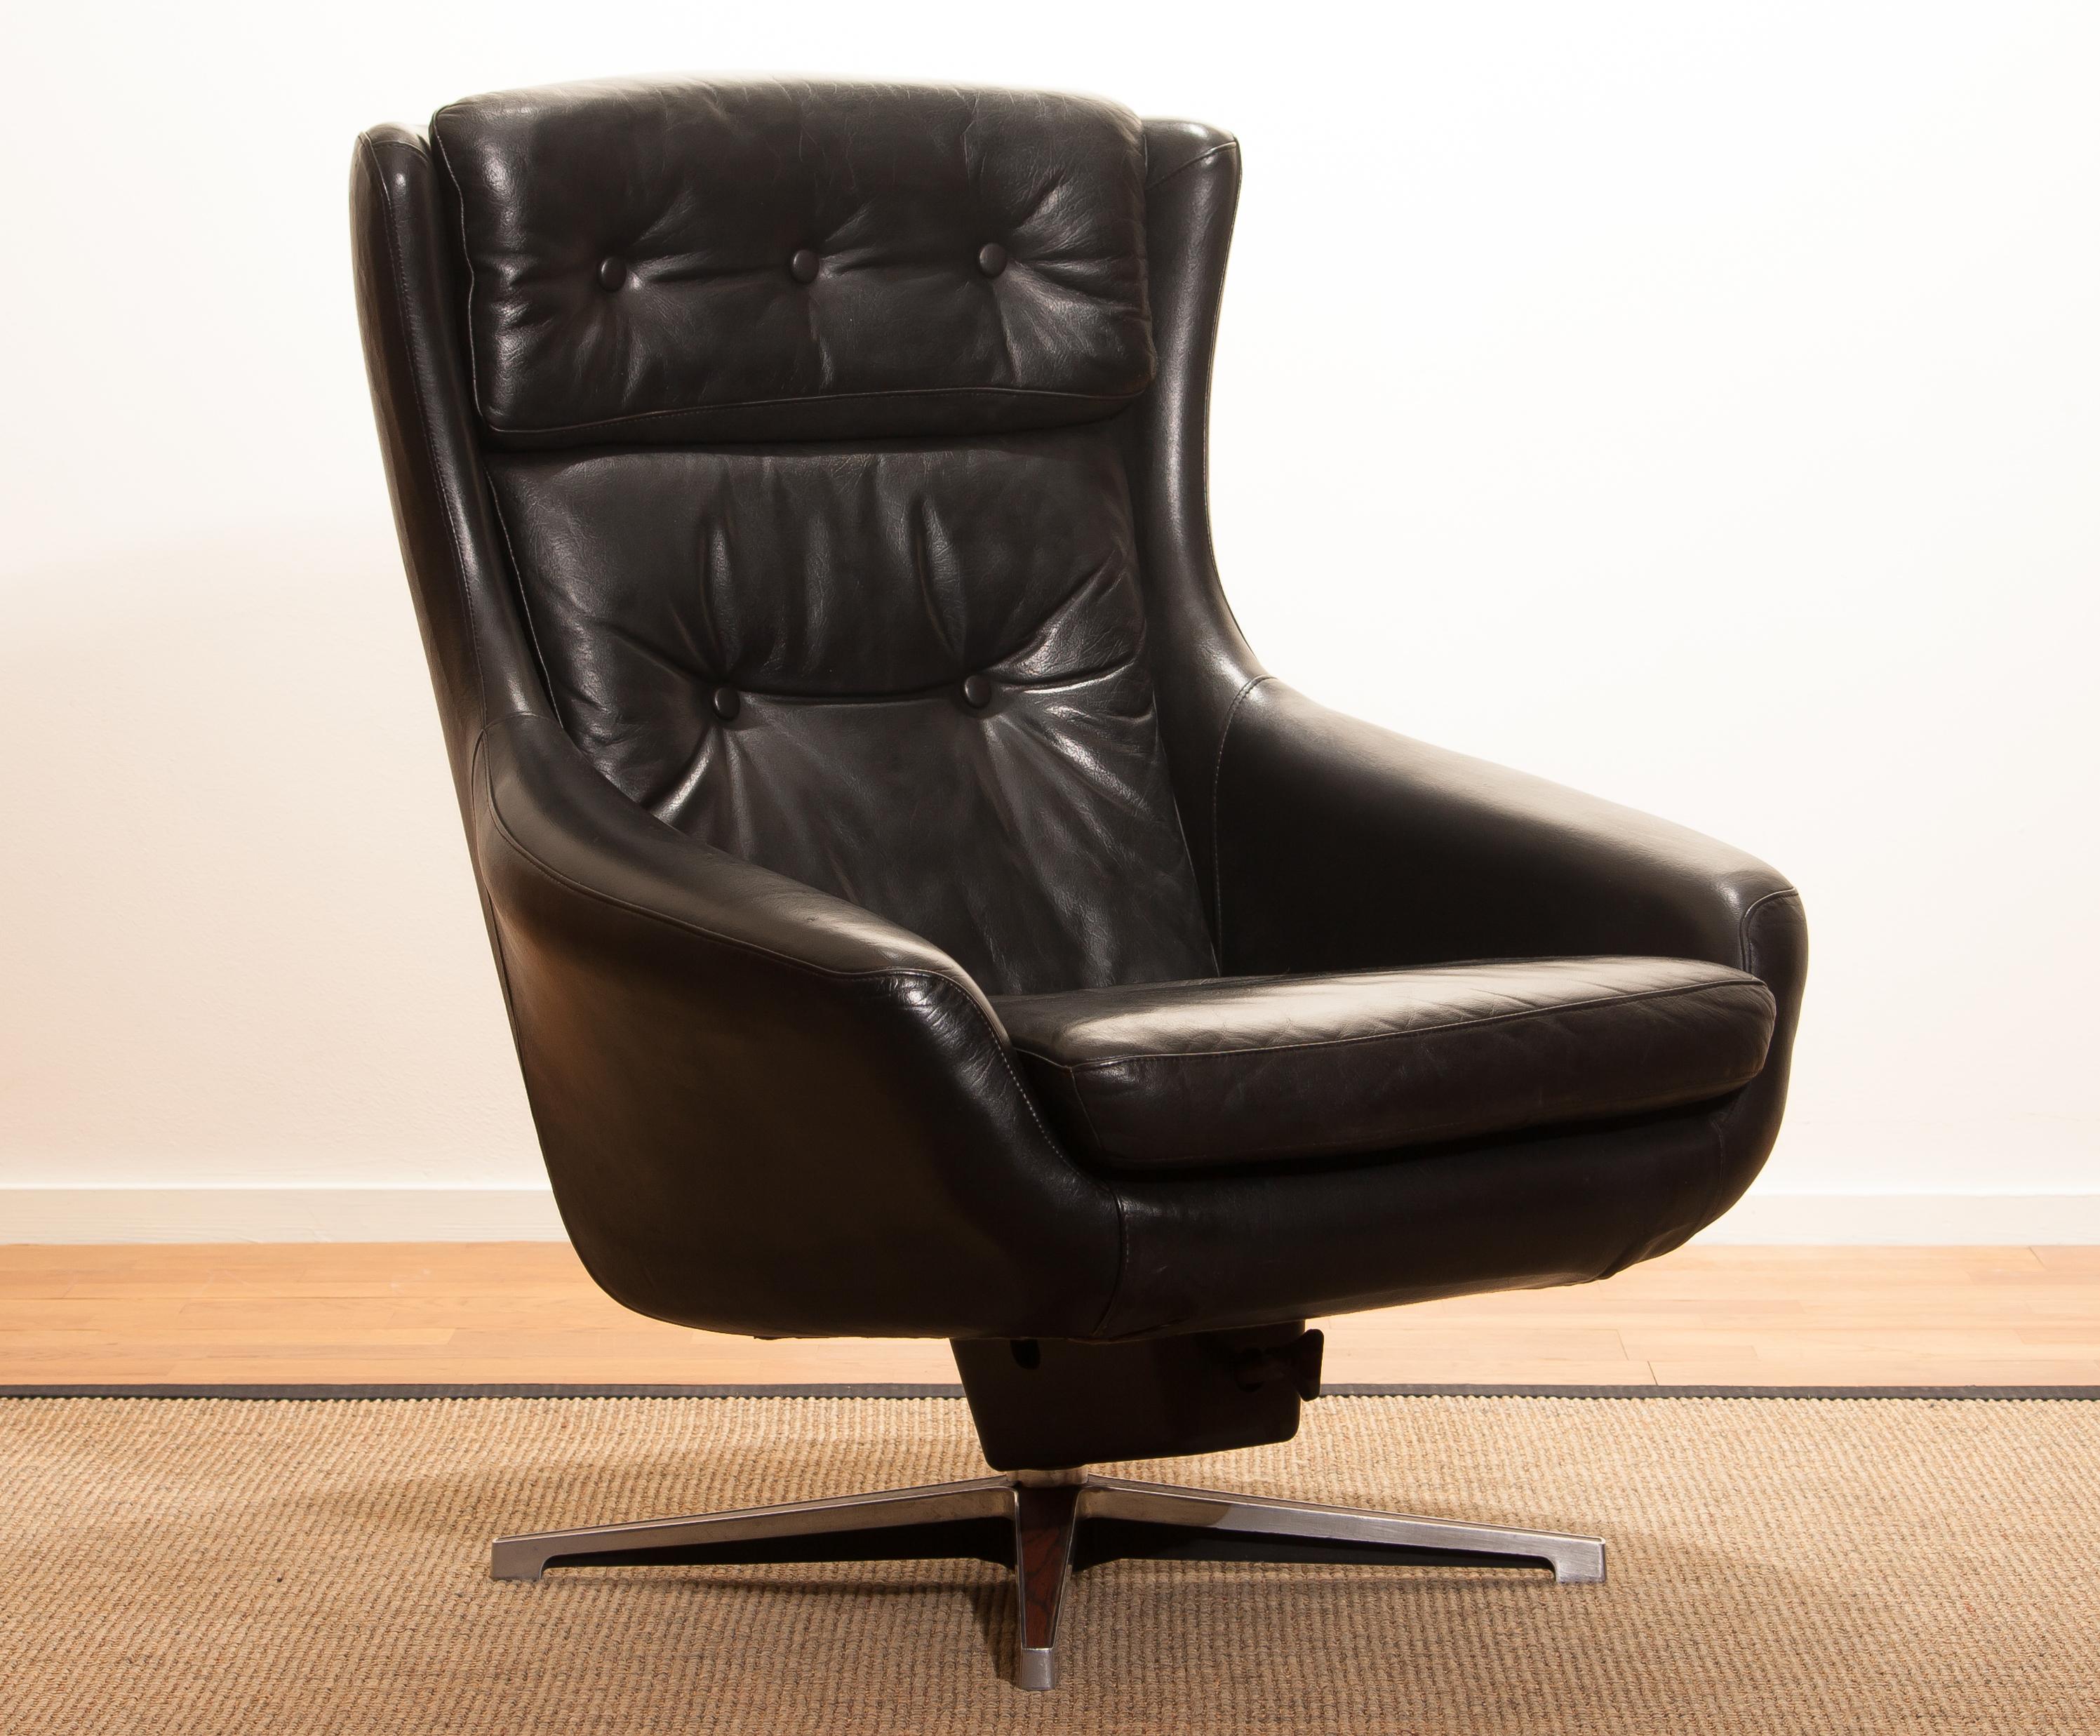 Beautiful swivel lounge chair by Lennart Bender.
This chair is made of a black leather seating on an aluminium/wood print swivel rocking frame.
It is in a very nice condition.
Period 1960s
Dimensions: H 91 cm, W 74 cm, D 70 cm, SH 40 cm.